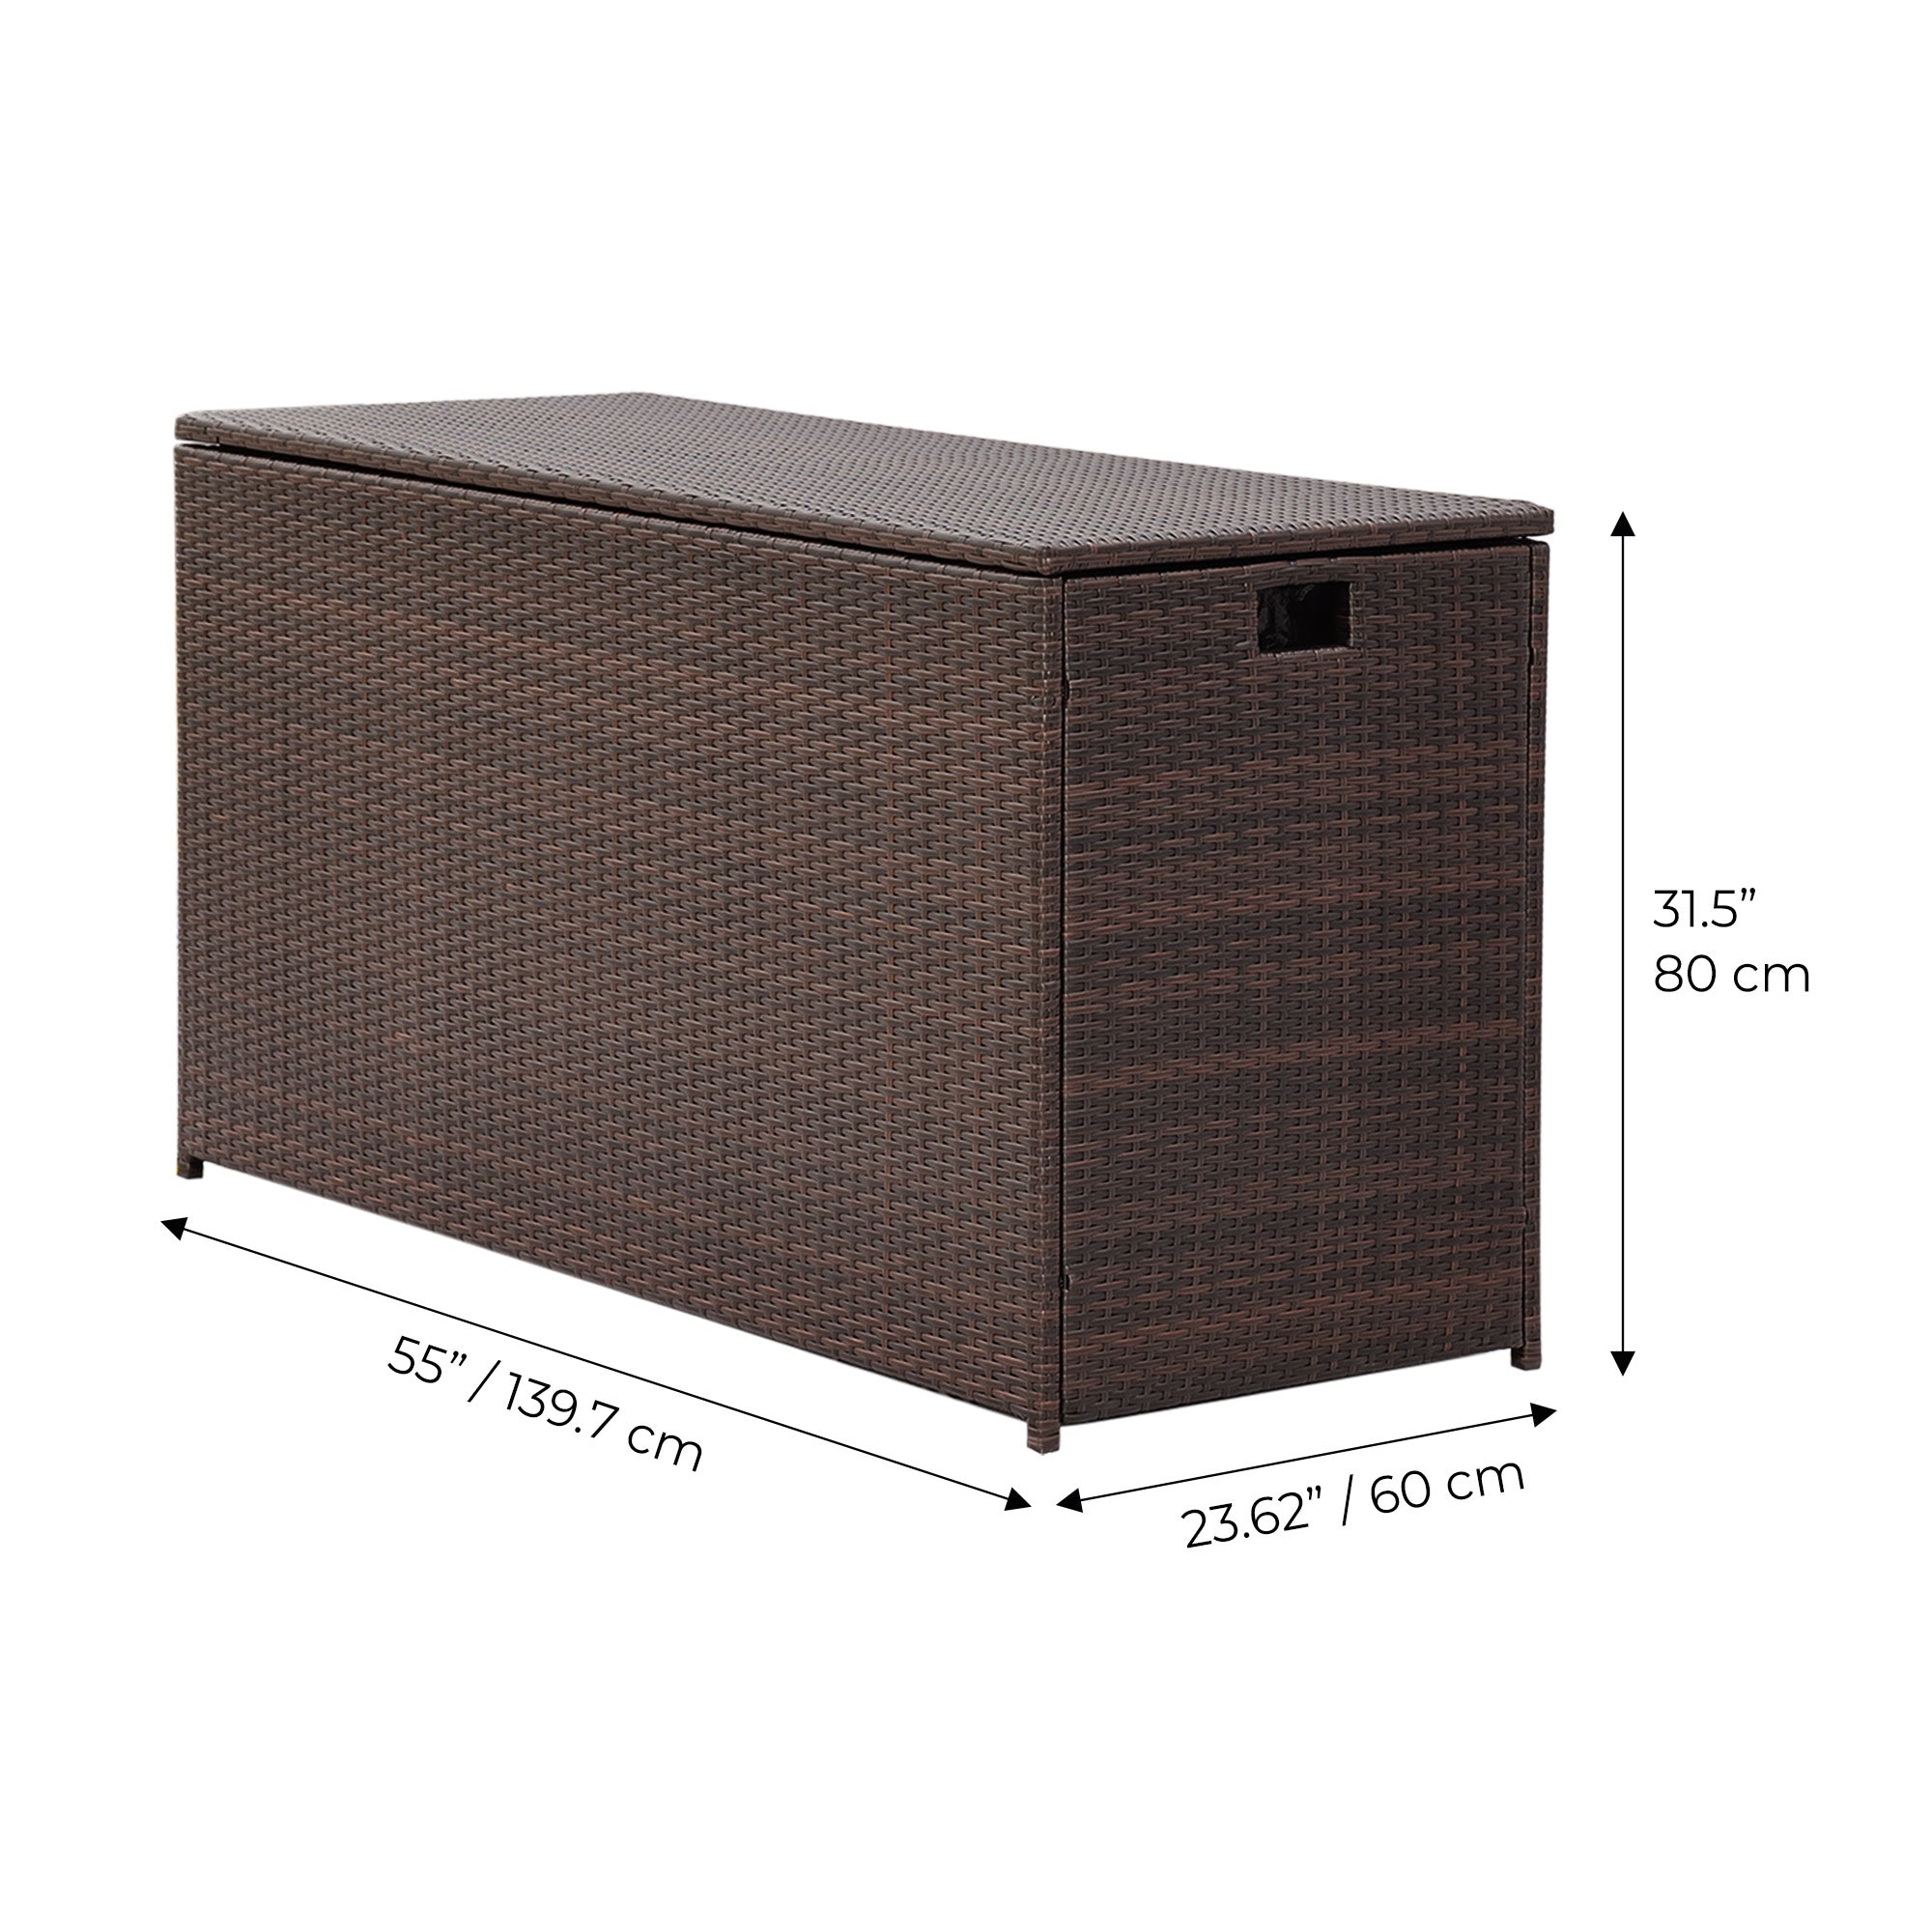 Teamson Home Wicker 154 Gallon Outdoor Deck Box for Cushions or Pool Accessory Storage, Brown